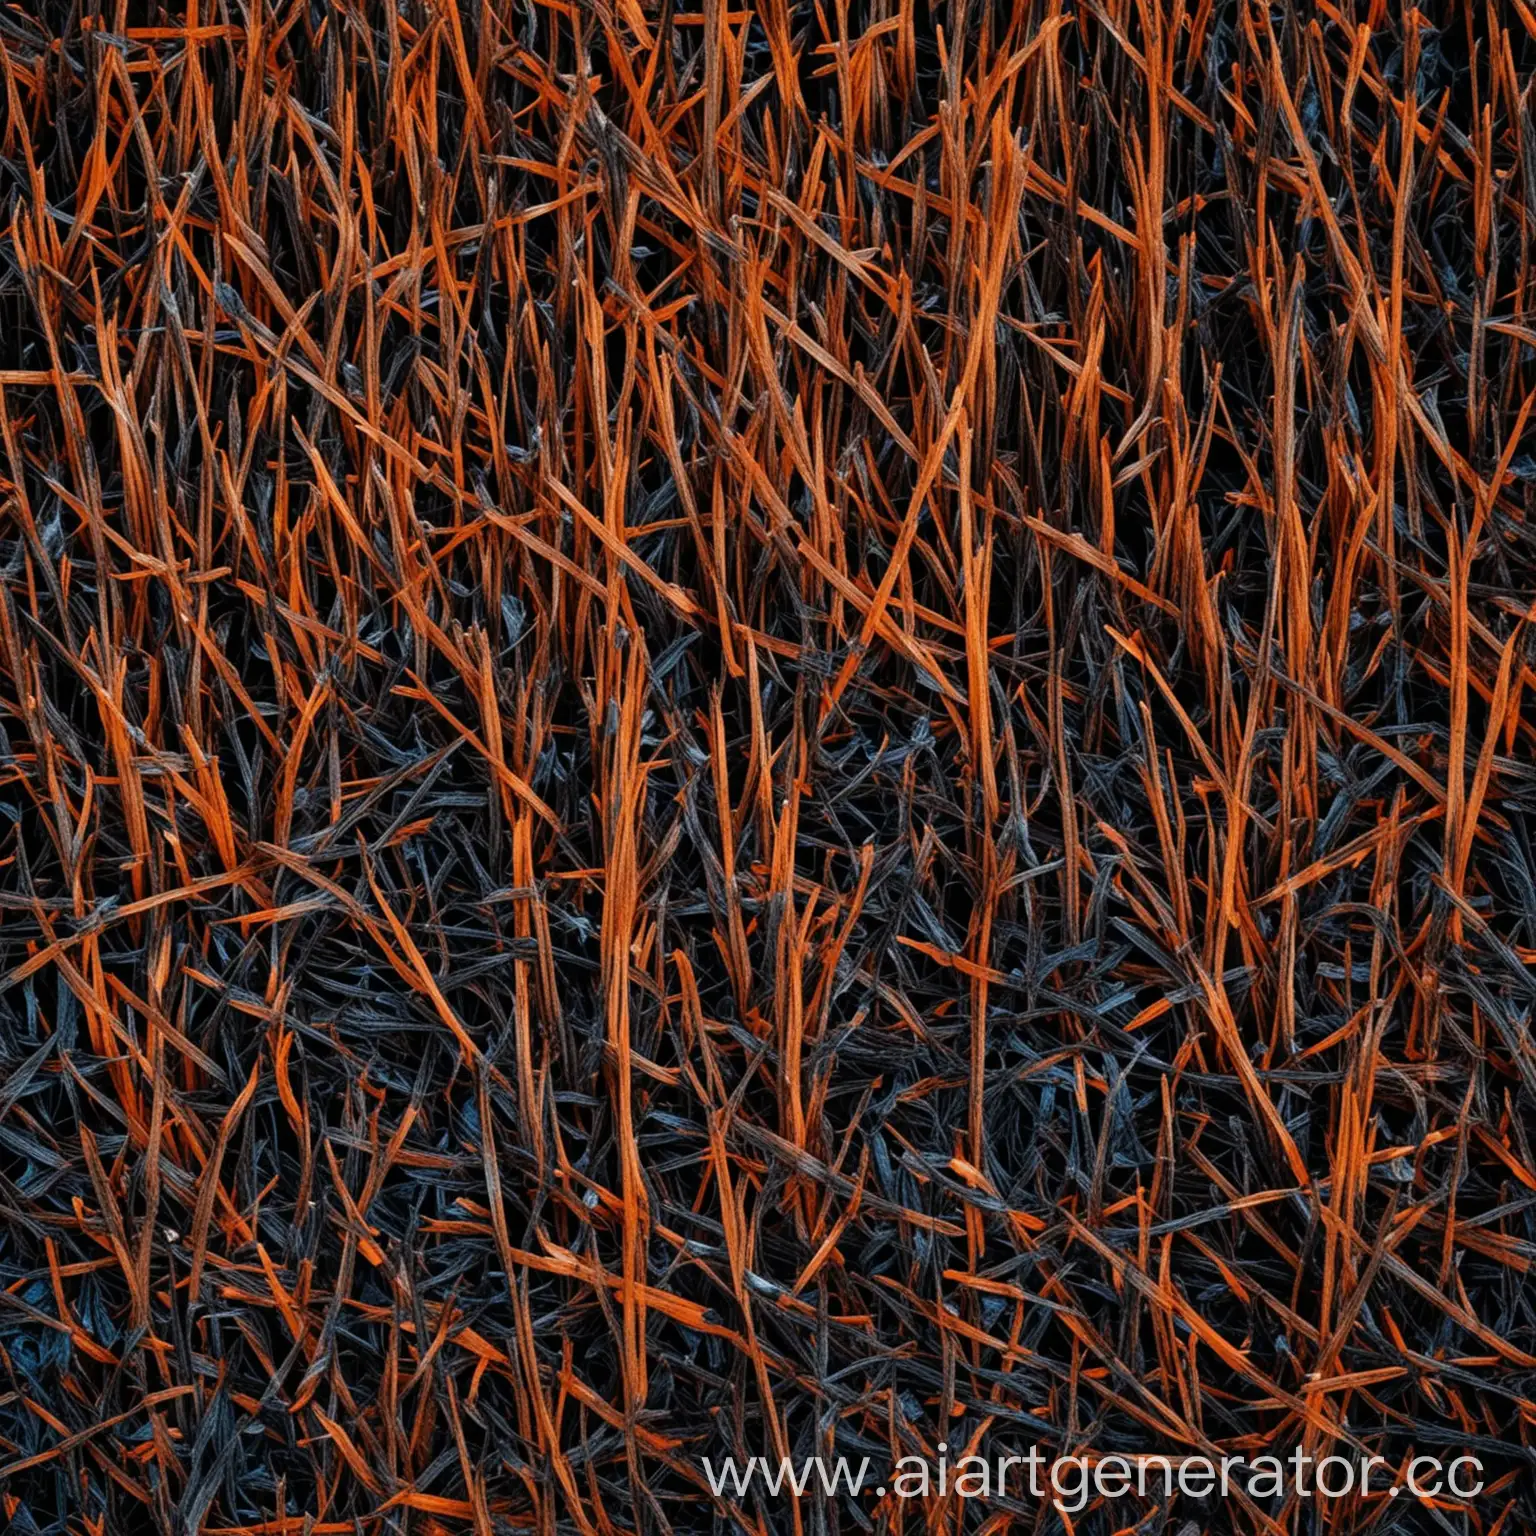 Microscopic-View-of-Burnt-Grass-Blades